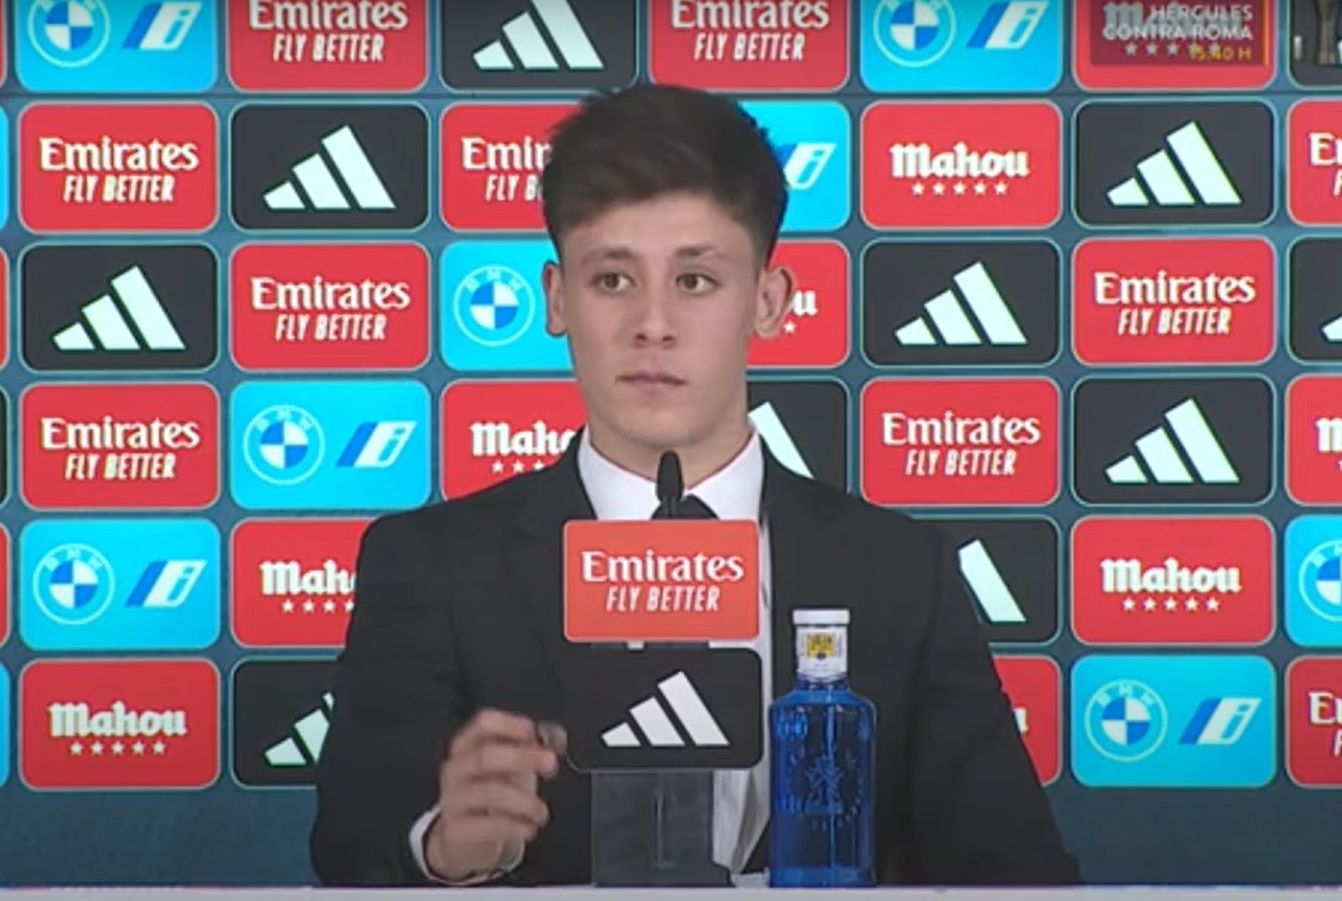  Arda Guler, a young Turkish midfielder, is presented as a new player of Real Madrid during a press conference.